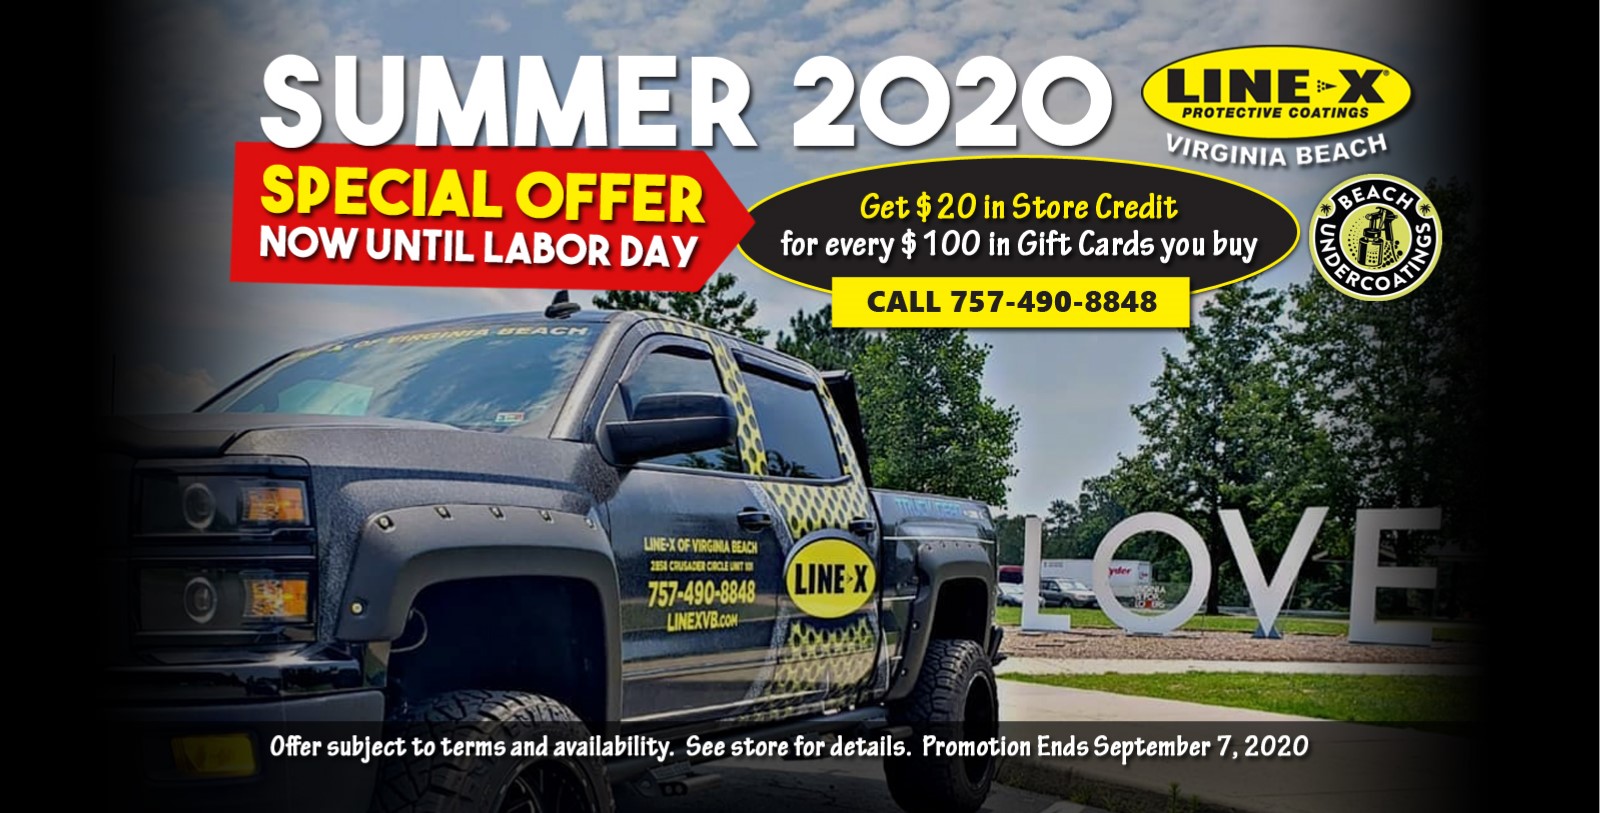 Summer 2020 Special Offer - Get $20 in store credits for every $100 in gift cards you buy between now and Labor Day